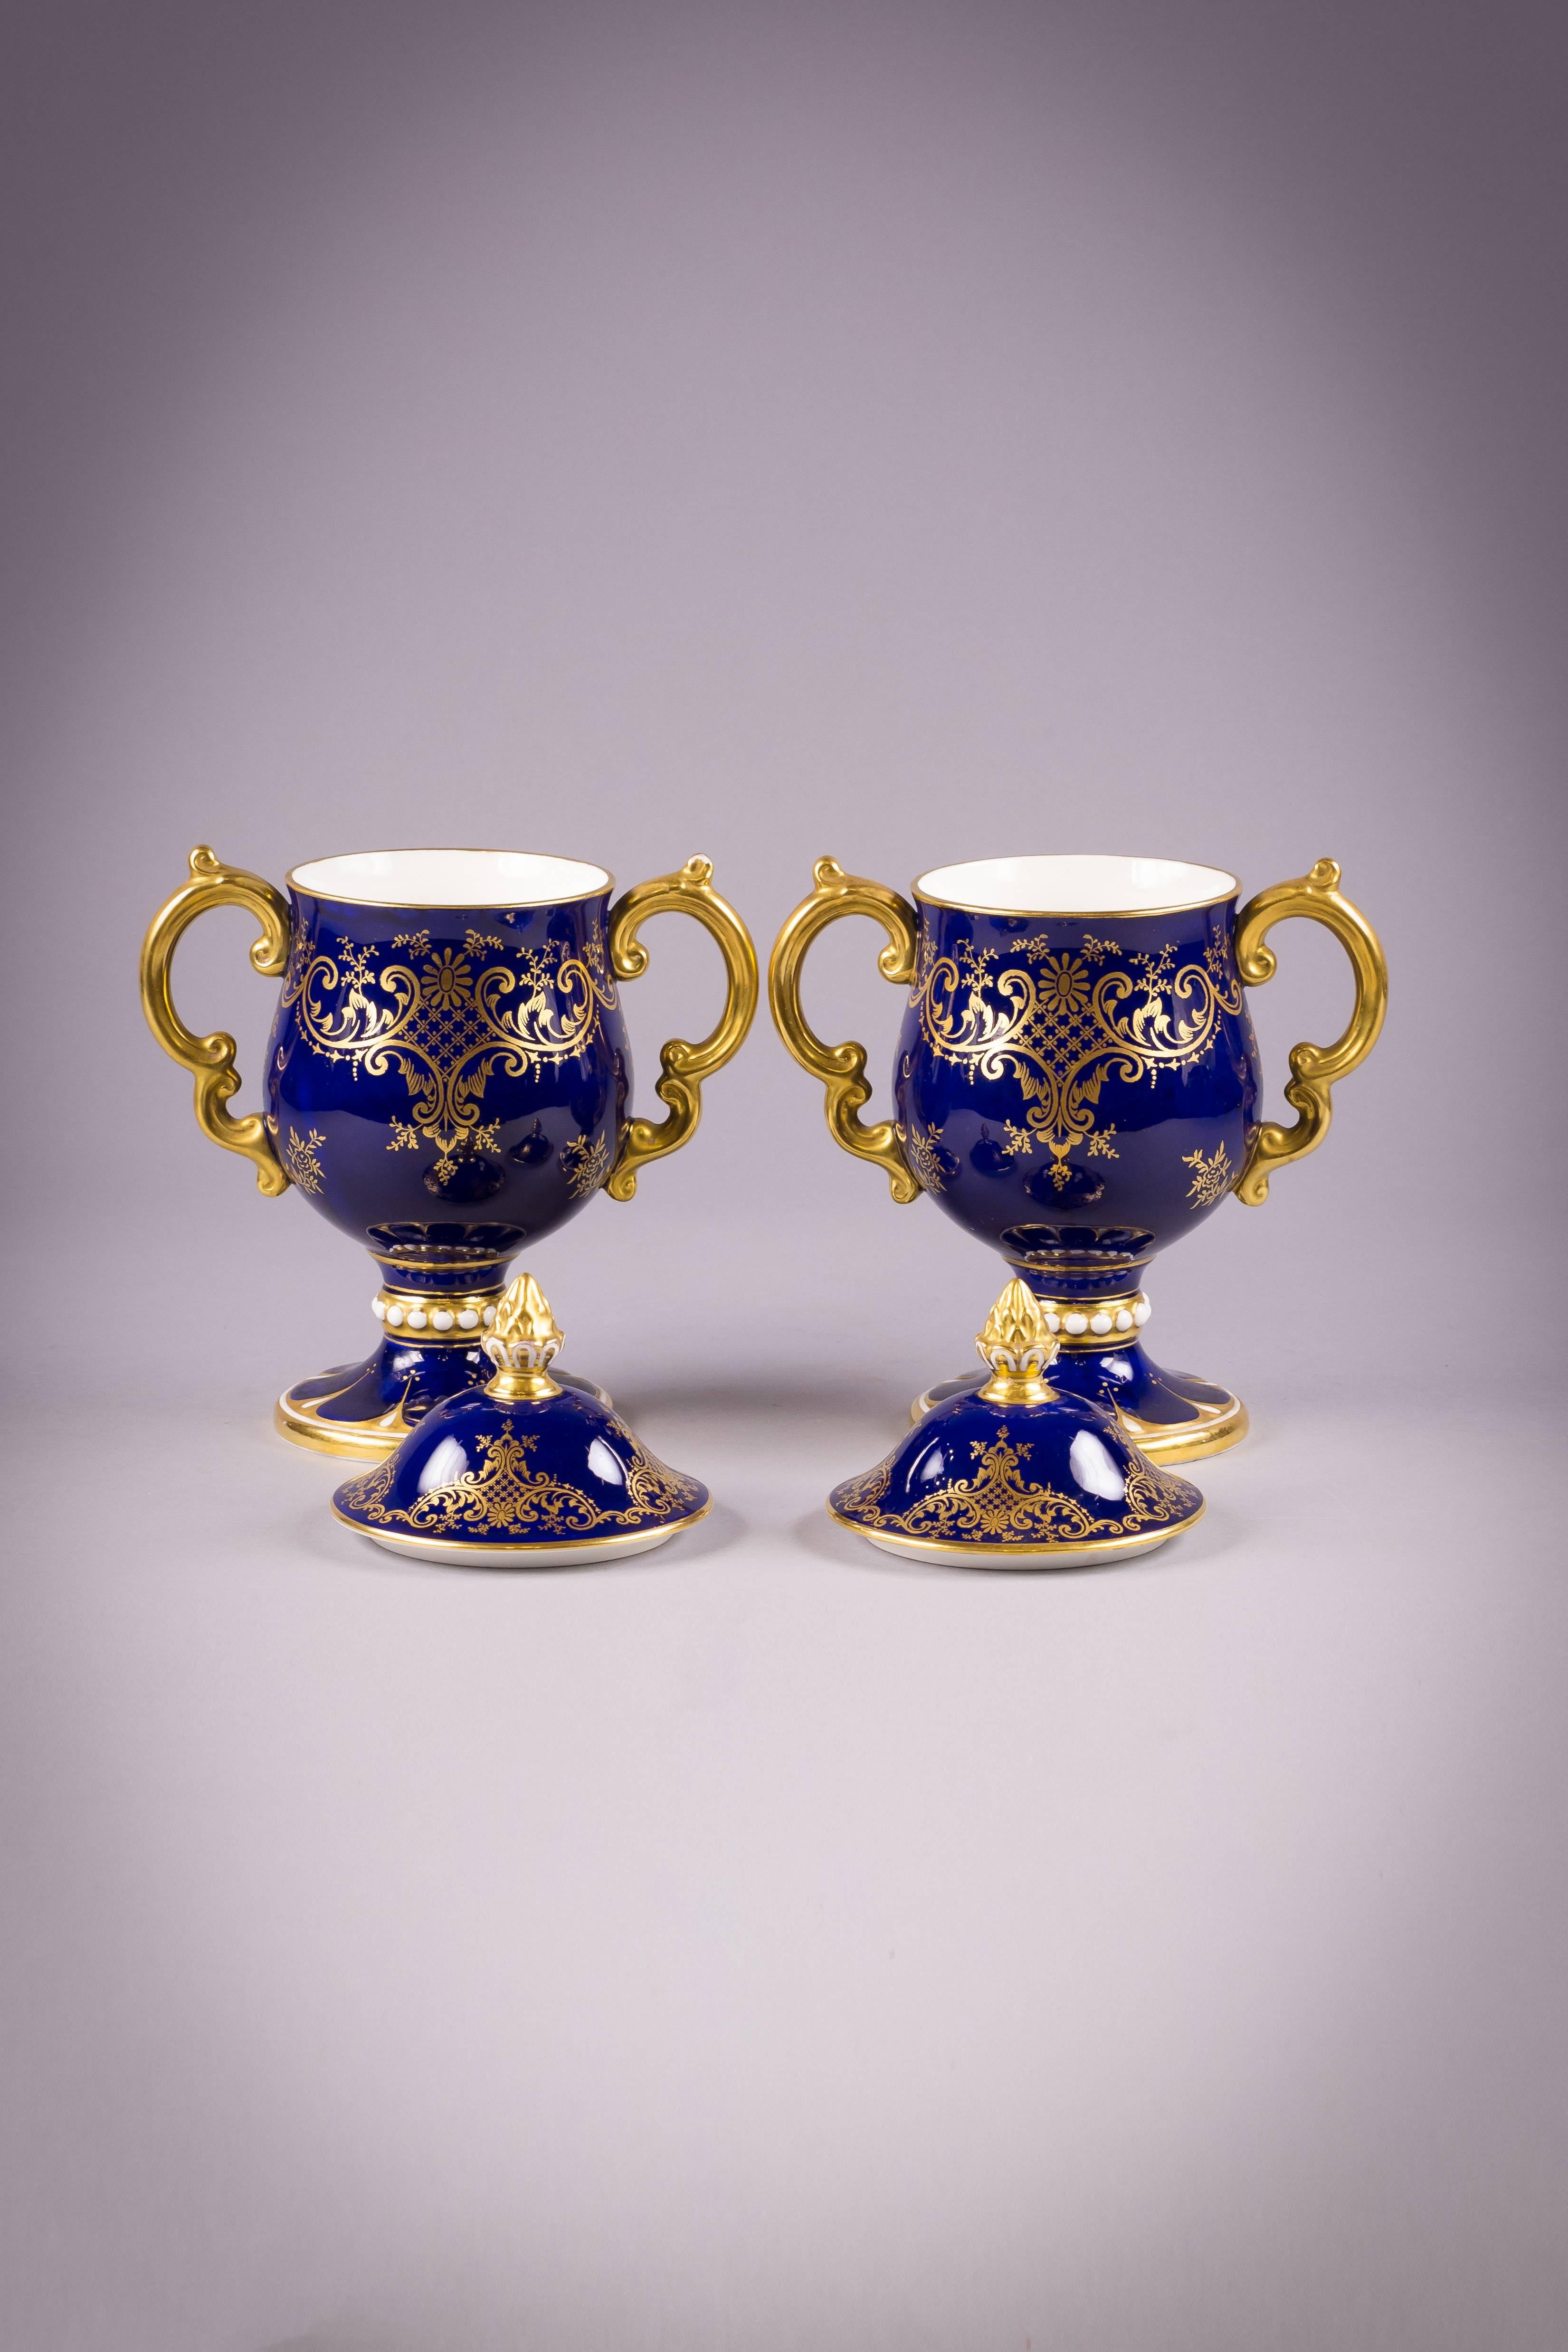 Pair of English porcelain covered loving cups. Coalport mark.